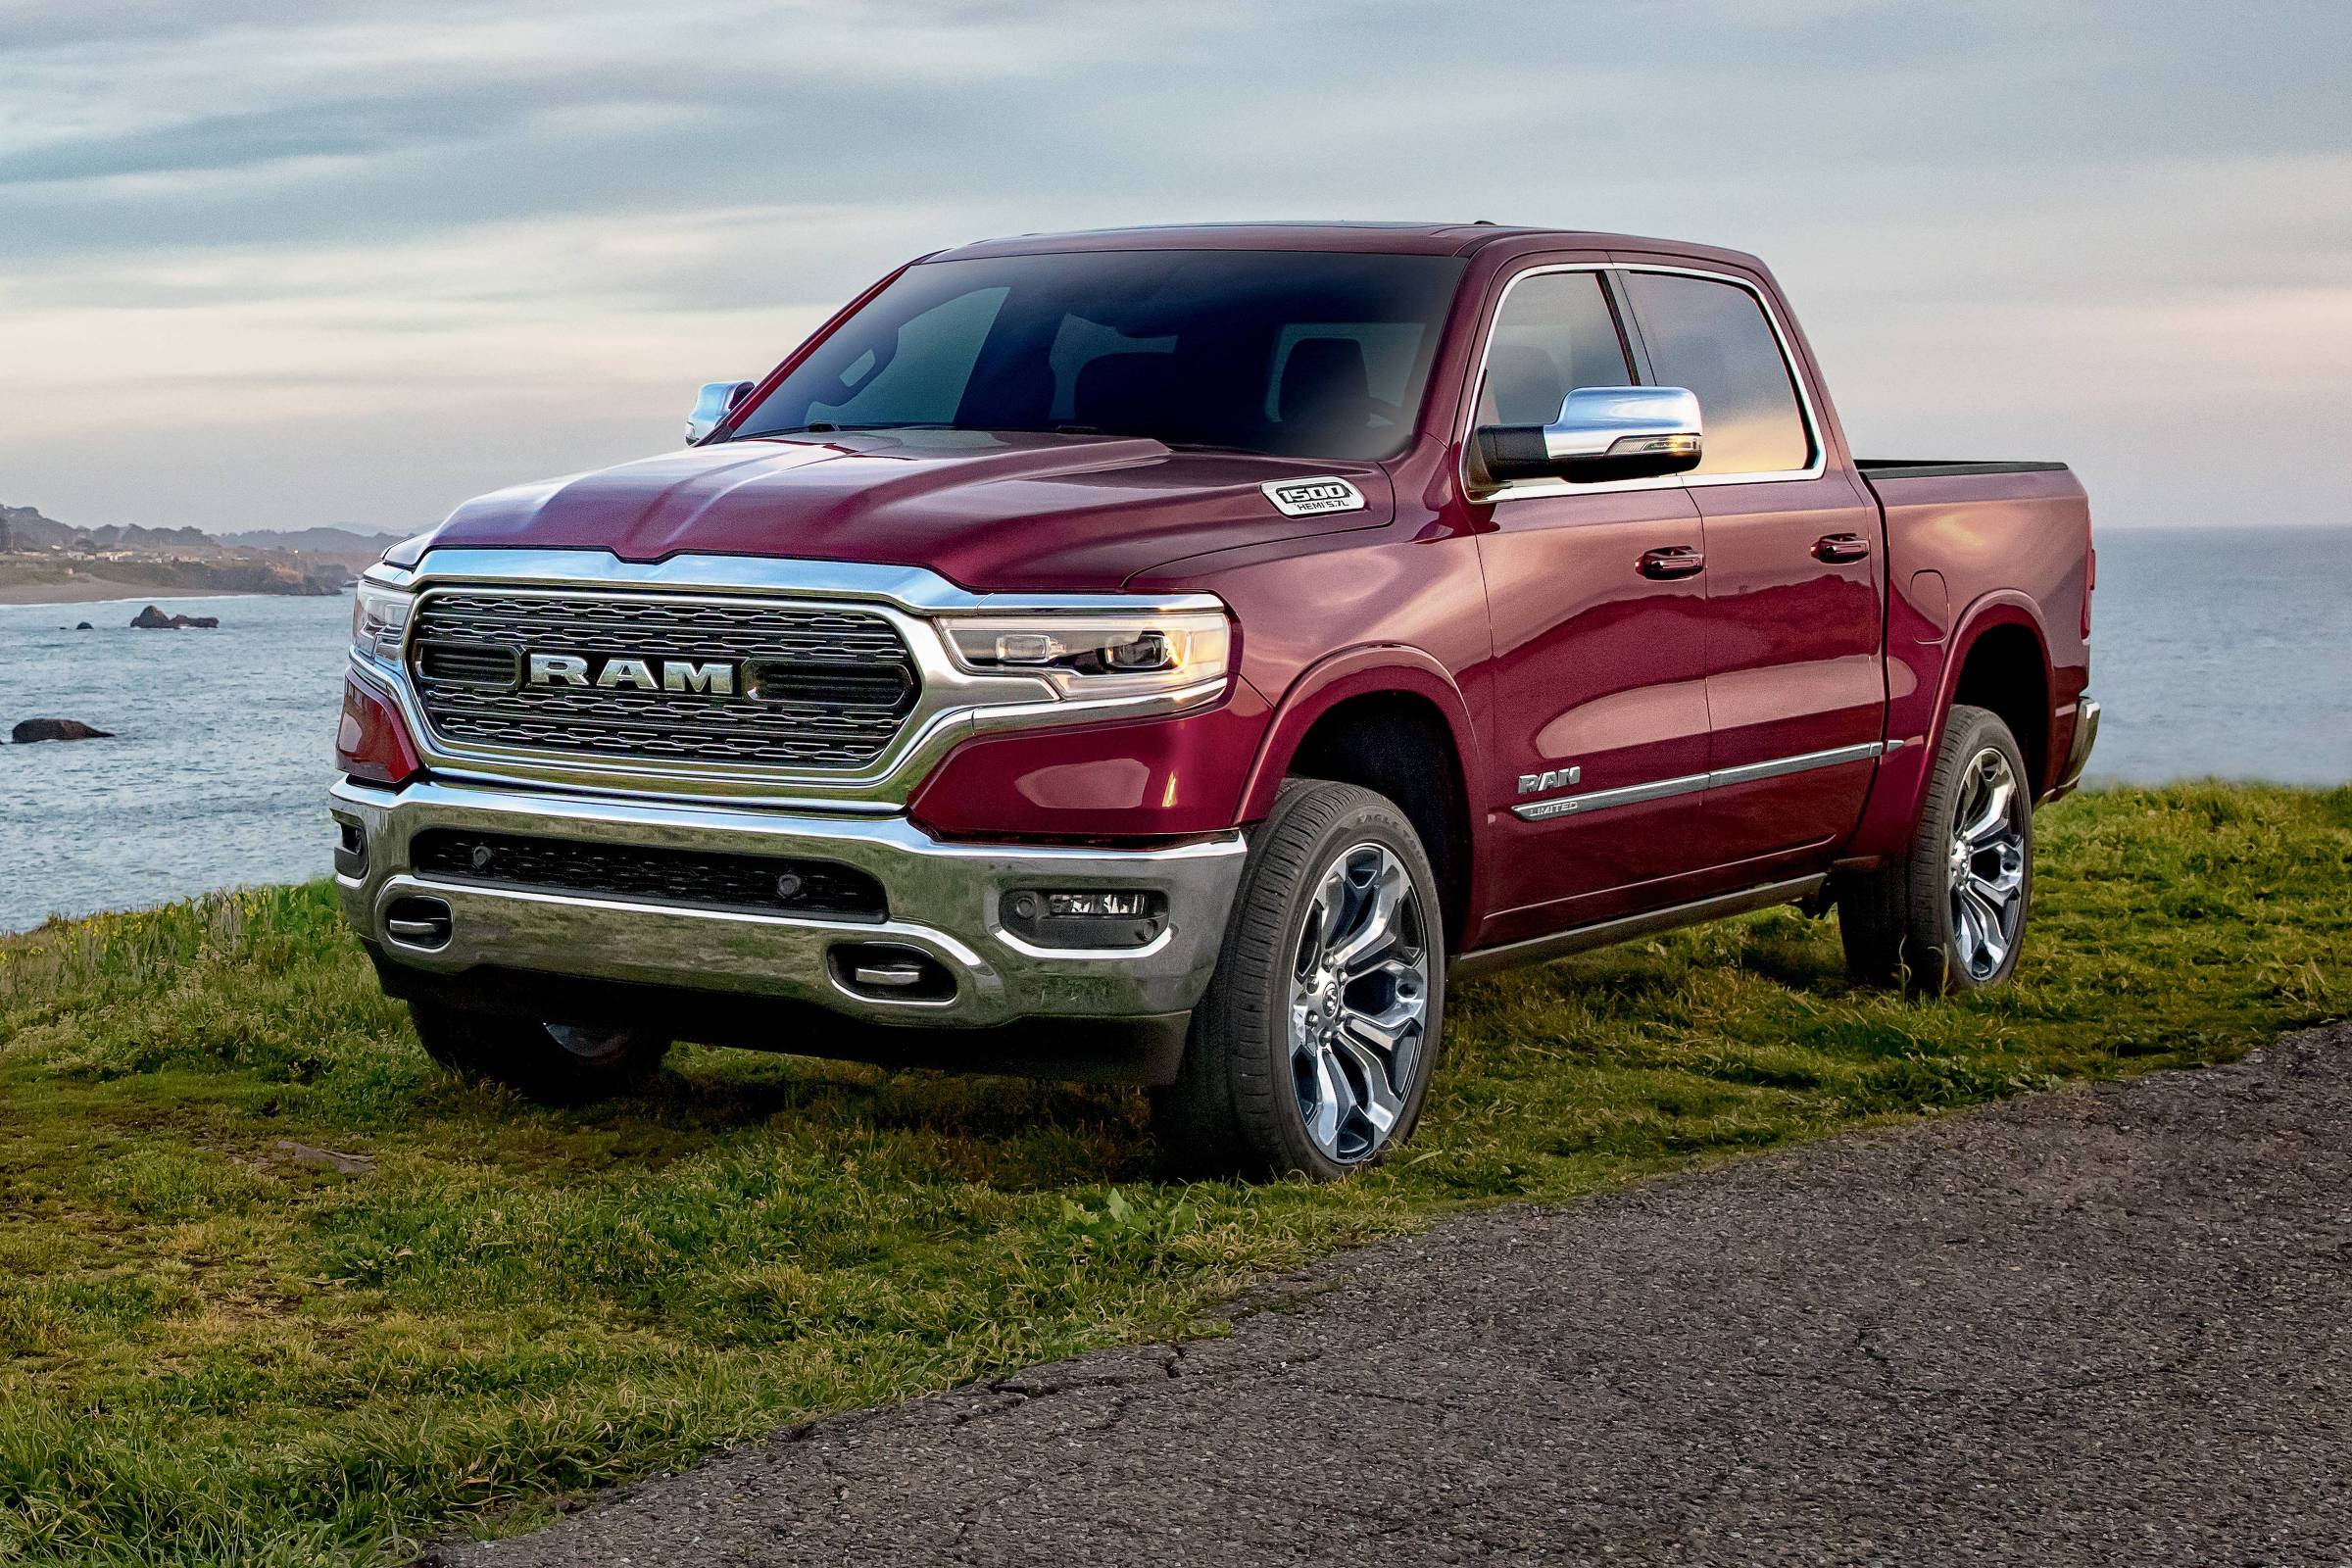 Pickup truck sales grow in Brazil, and Strada leads the market – 05/20/2023 – Market